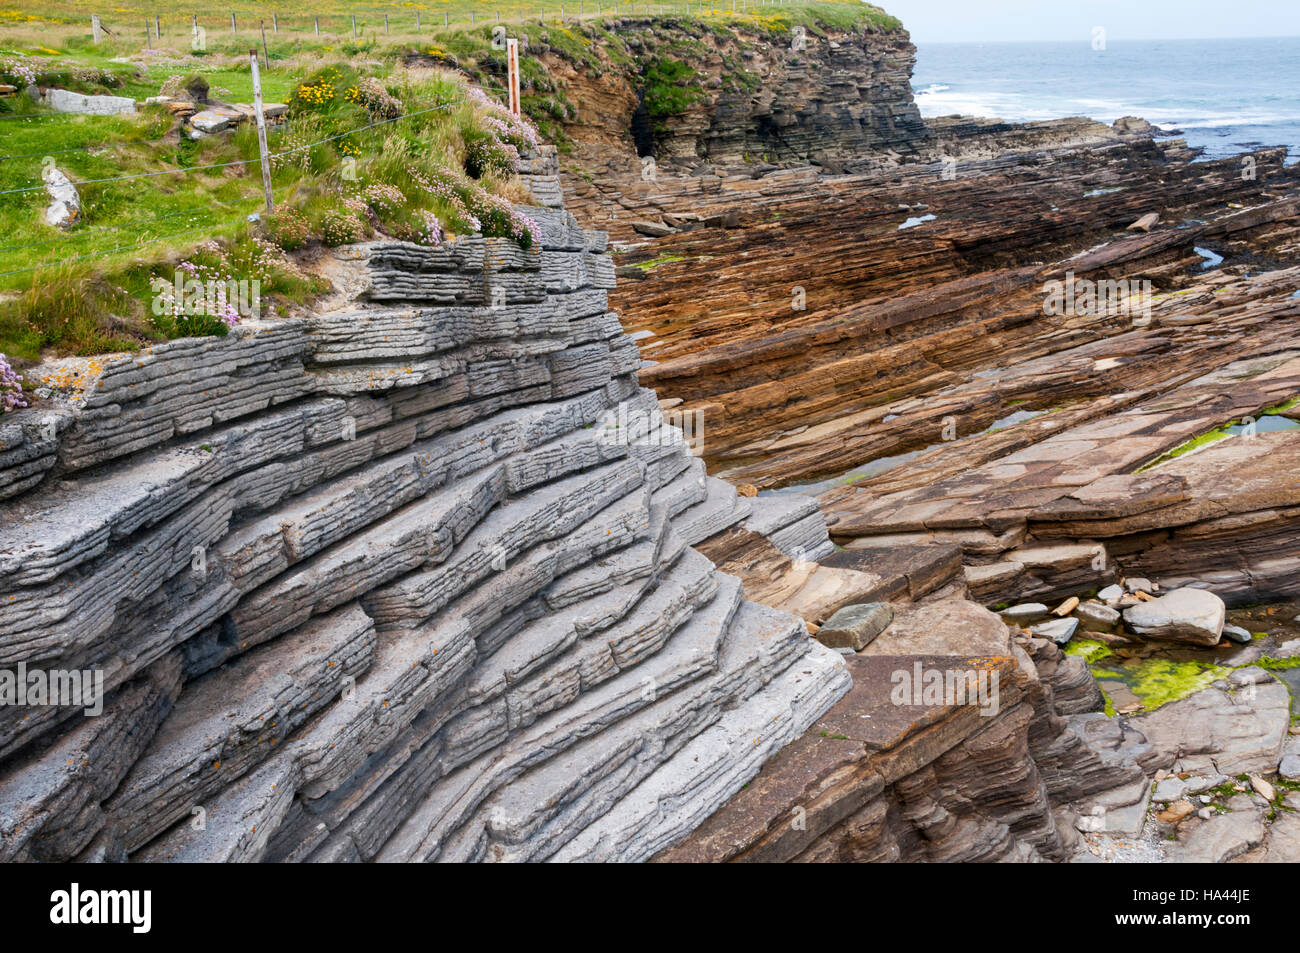 Concrete coast protection moulded to mimic surrounding geology at the Brough of Birsay, Orkney. Stock Photo